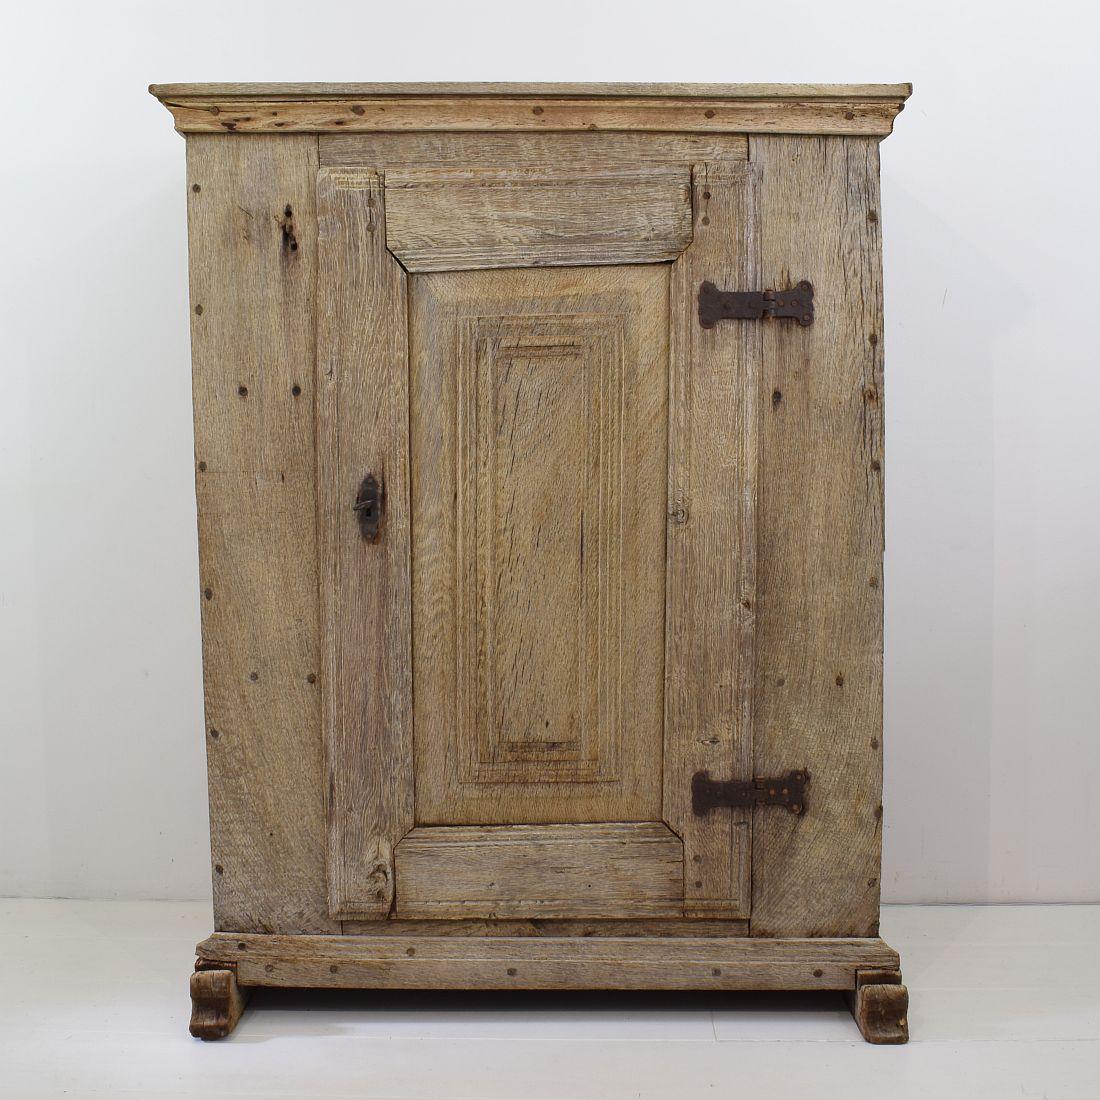 Rare Dutch oak armoire with original hand forged iron hinges. Great weathered look.
Holland, circa 1750
Weathered, small losses and old repairs. Lock once renewed.
More pictures are available on request.